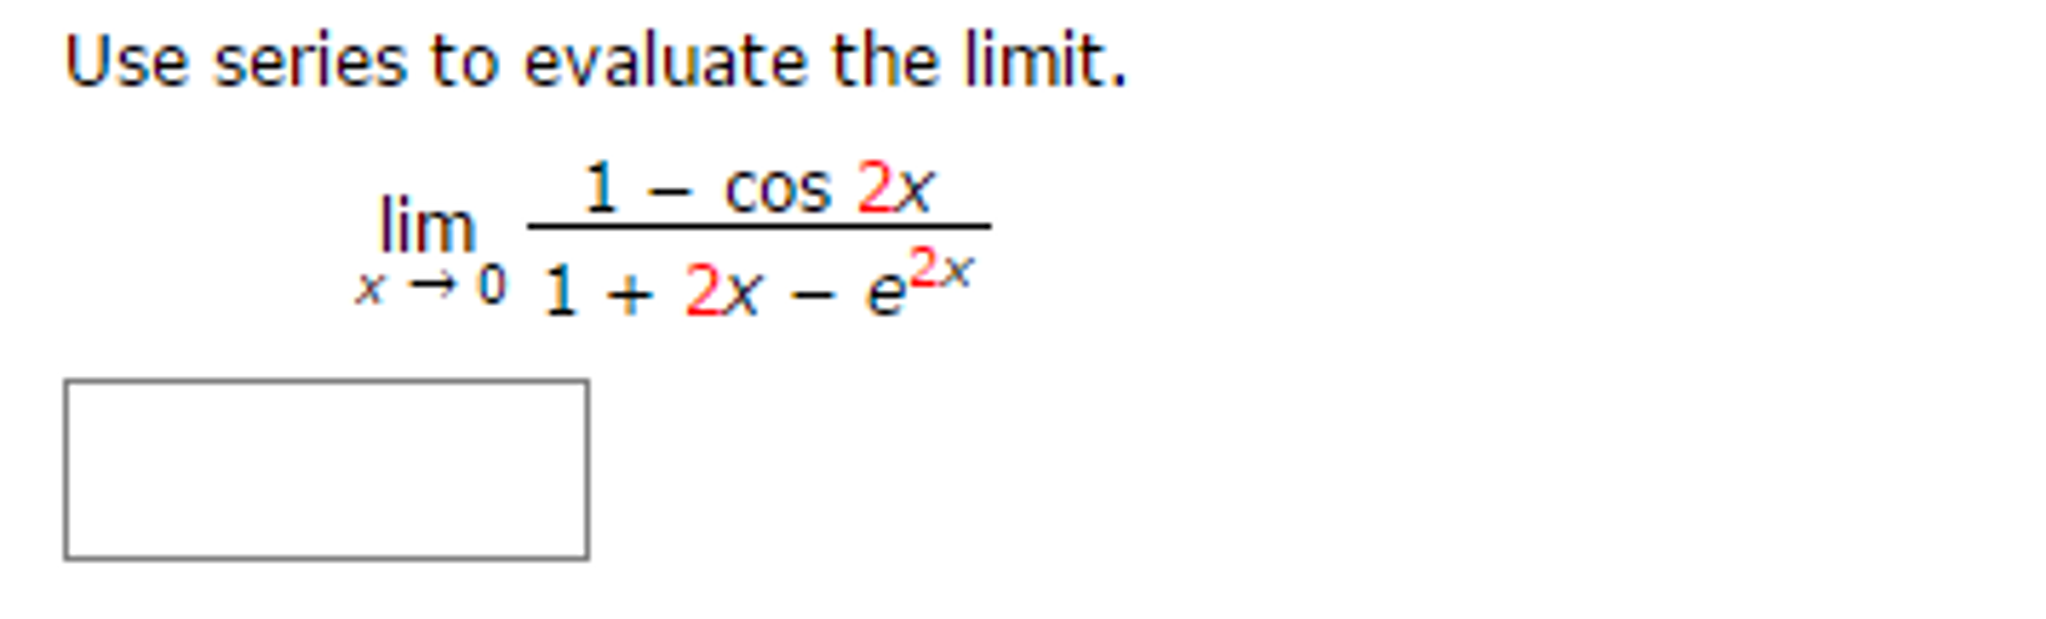 Solved Use Series To Evaluate The Limit Limx Rightarrow 1 4150